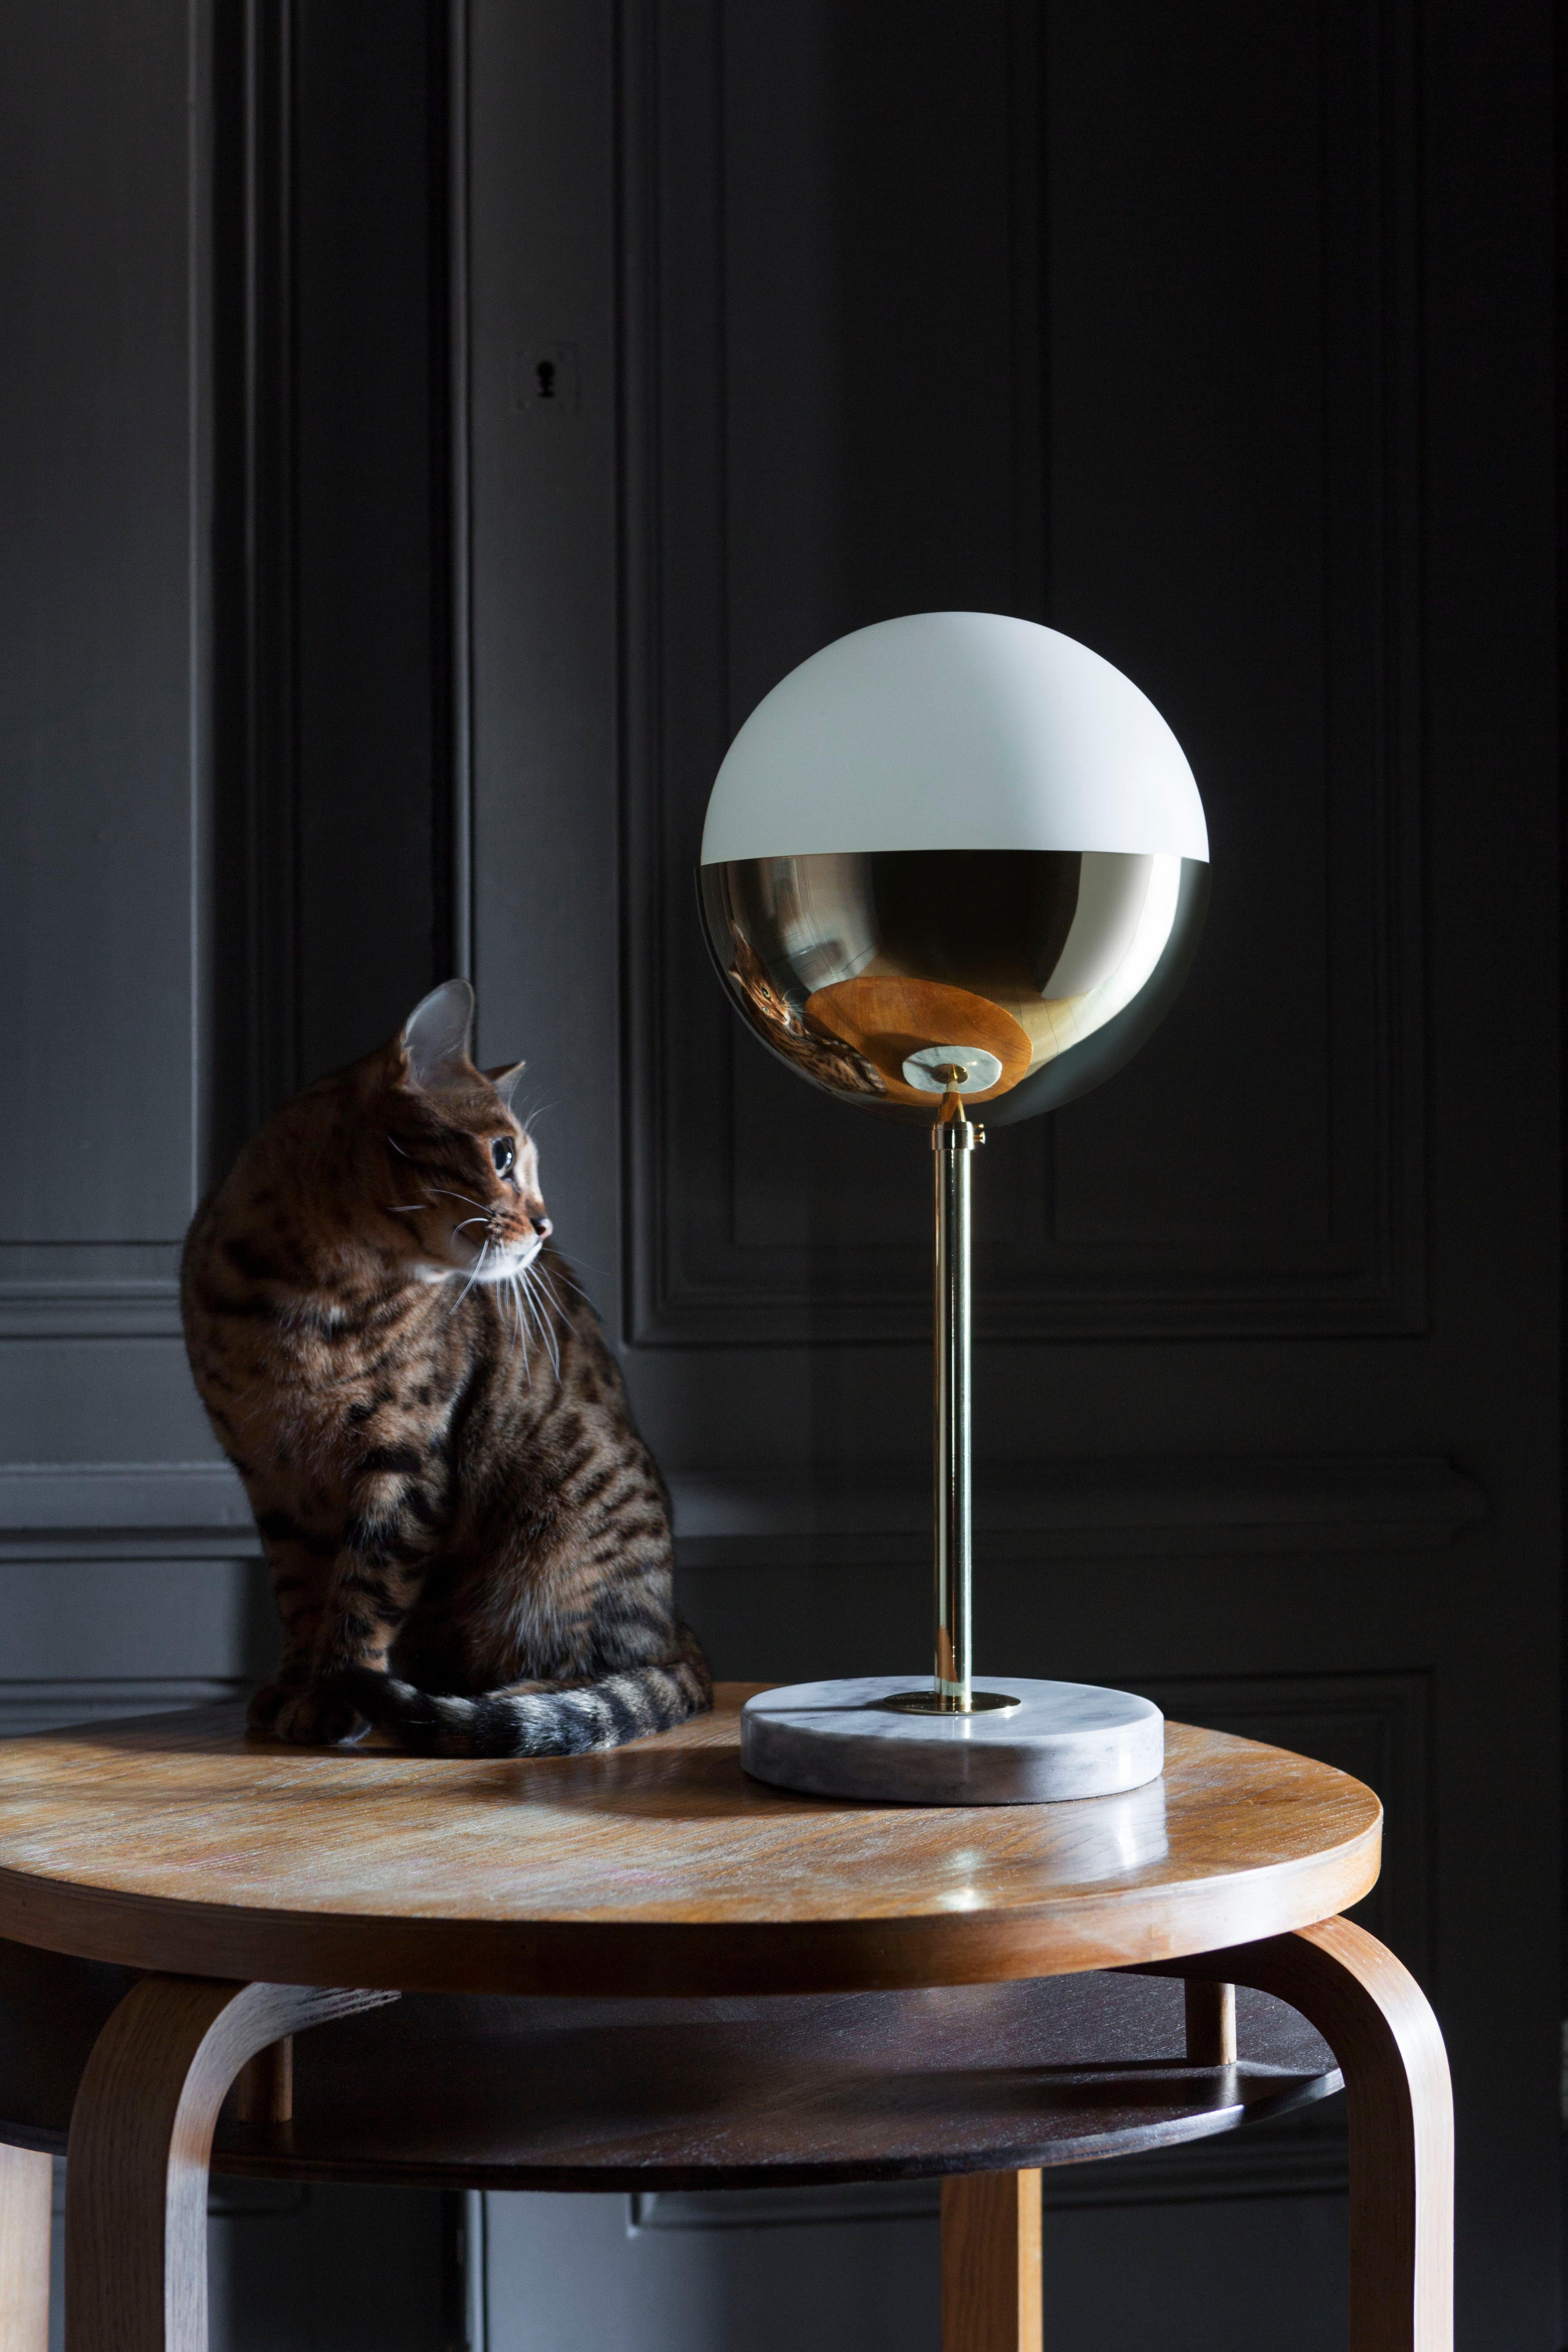 Marble table lamp 01 by Magic Circus Editions
Dimensions: H 50 x W 22 cm
 diameter spheres: 22 cm
Materials: Marble, Smooth brass, mouth blown glass
Dimmable version available.
Available Finishes: Brass, nickel
Available colors (central tube):